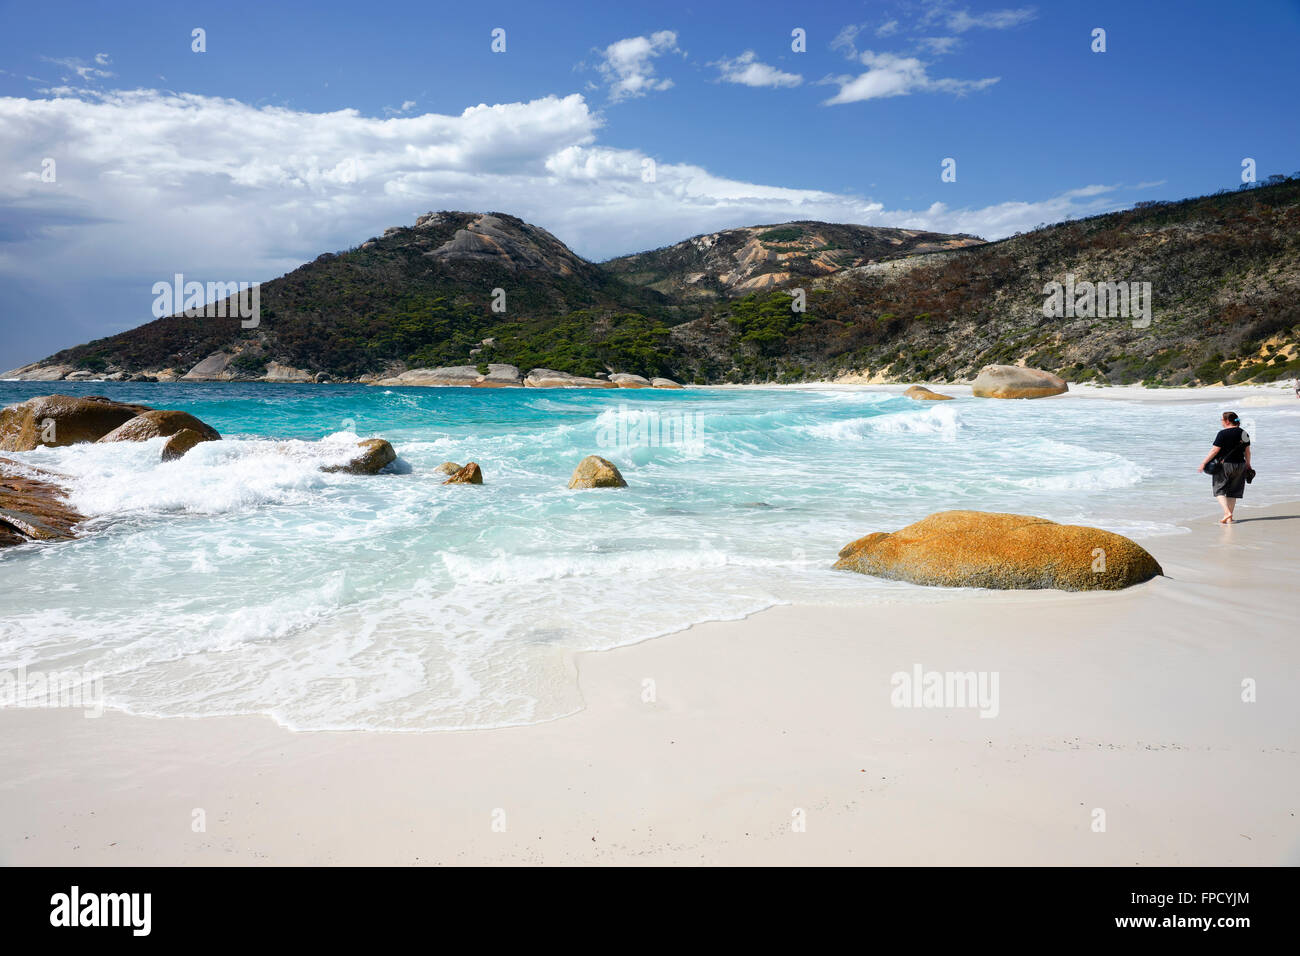 Two People's bay east of Albany on the South Coast of west Australia Stock Photo